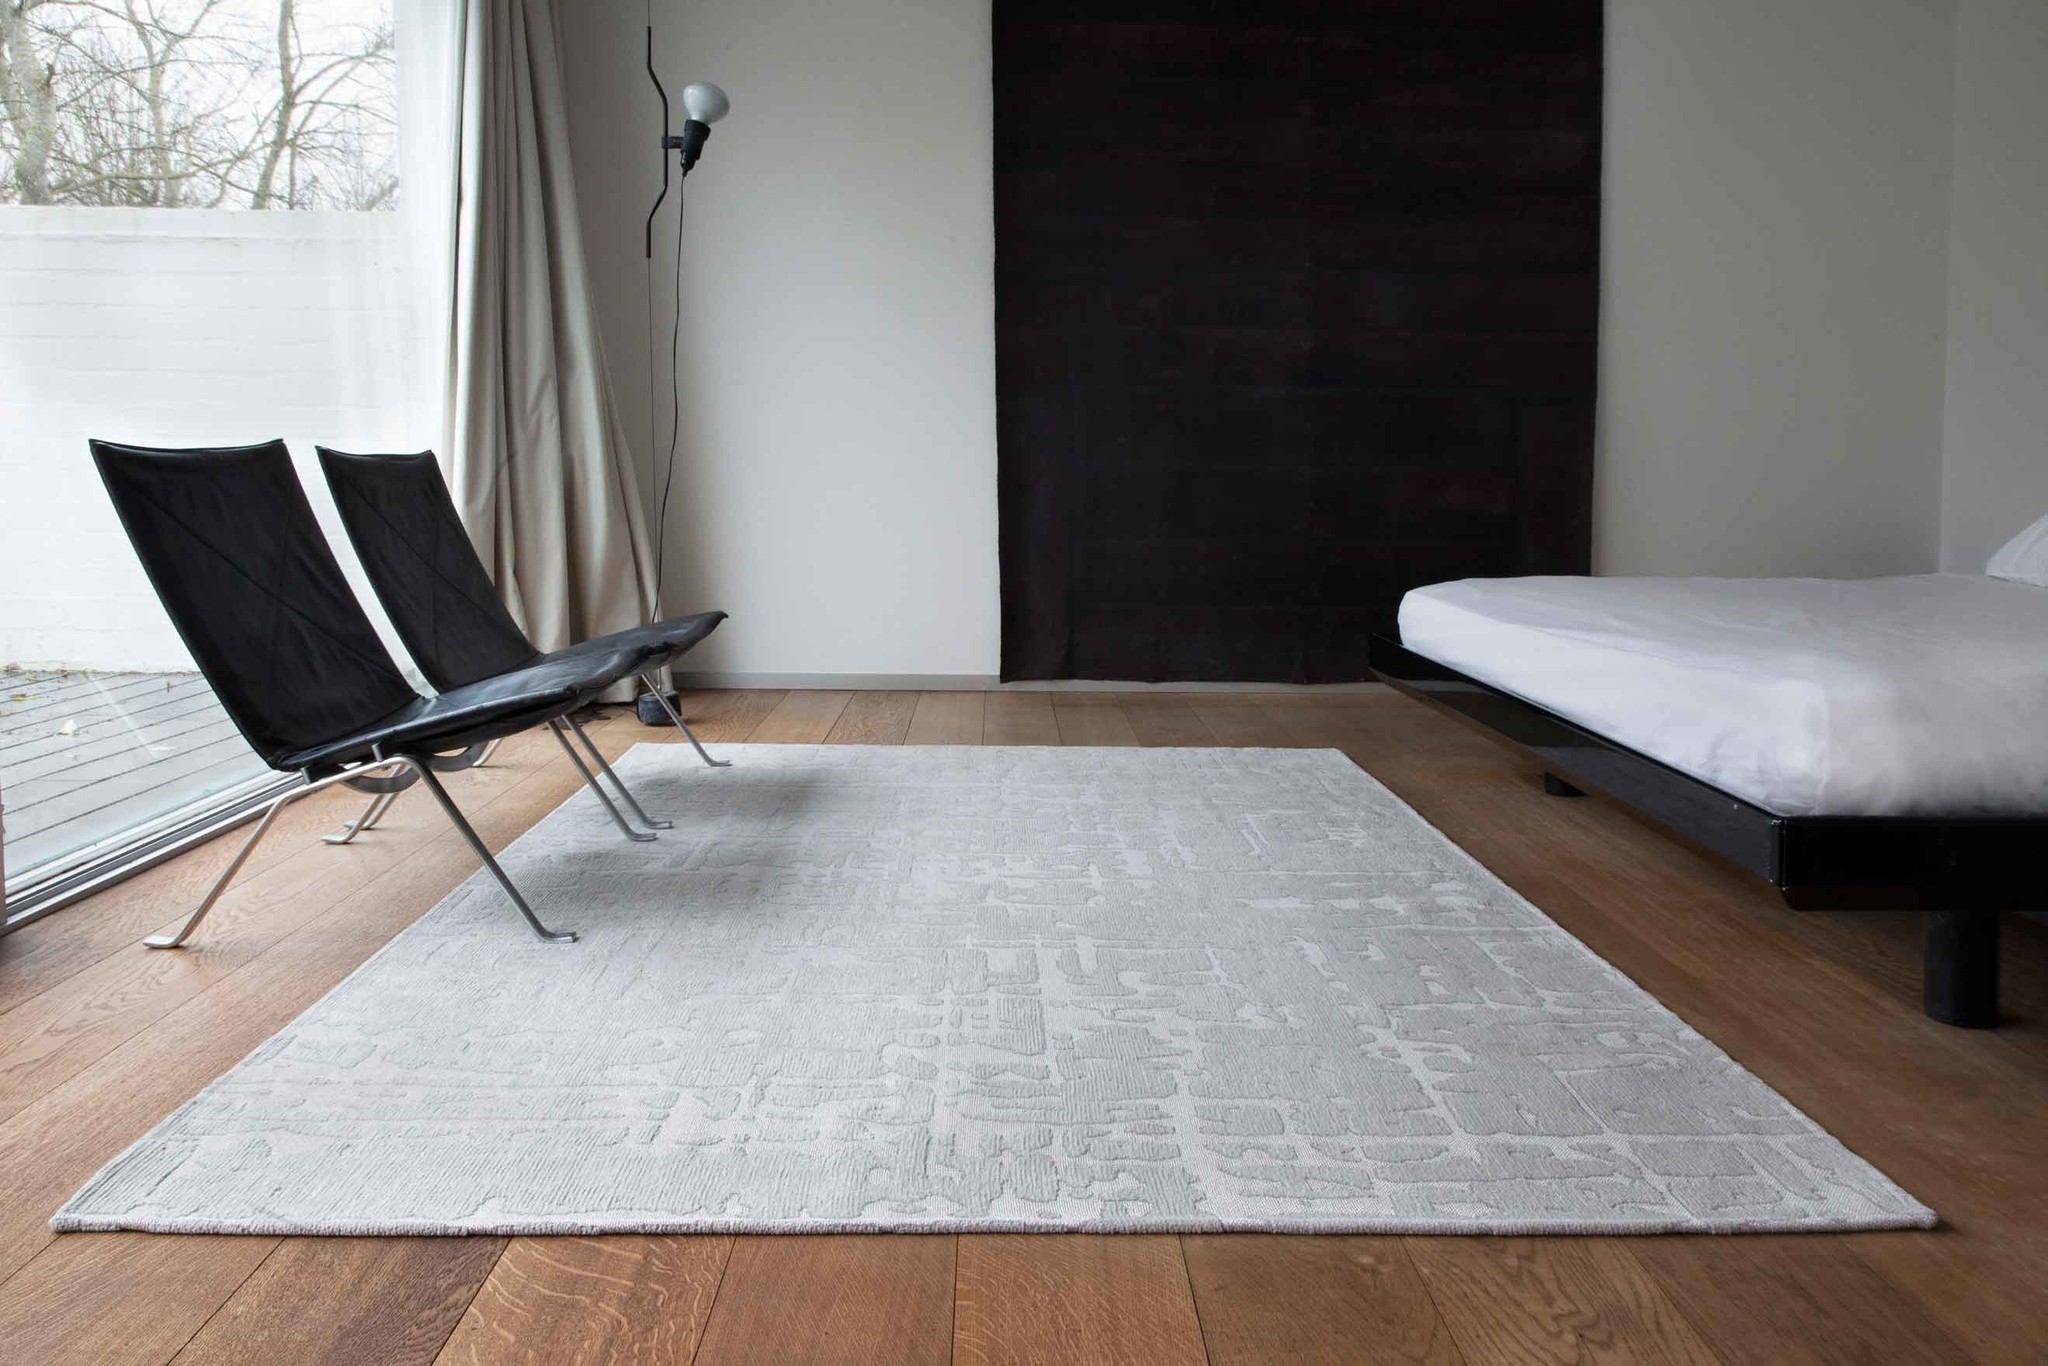 Abstract Silver Belgian Rug ☞ Size: 9' 2" x 13' (280 x 390 cm)